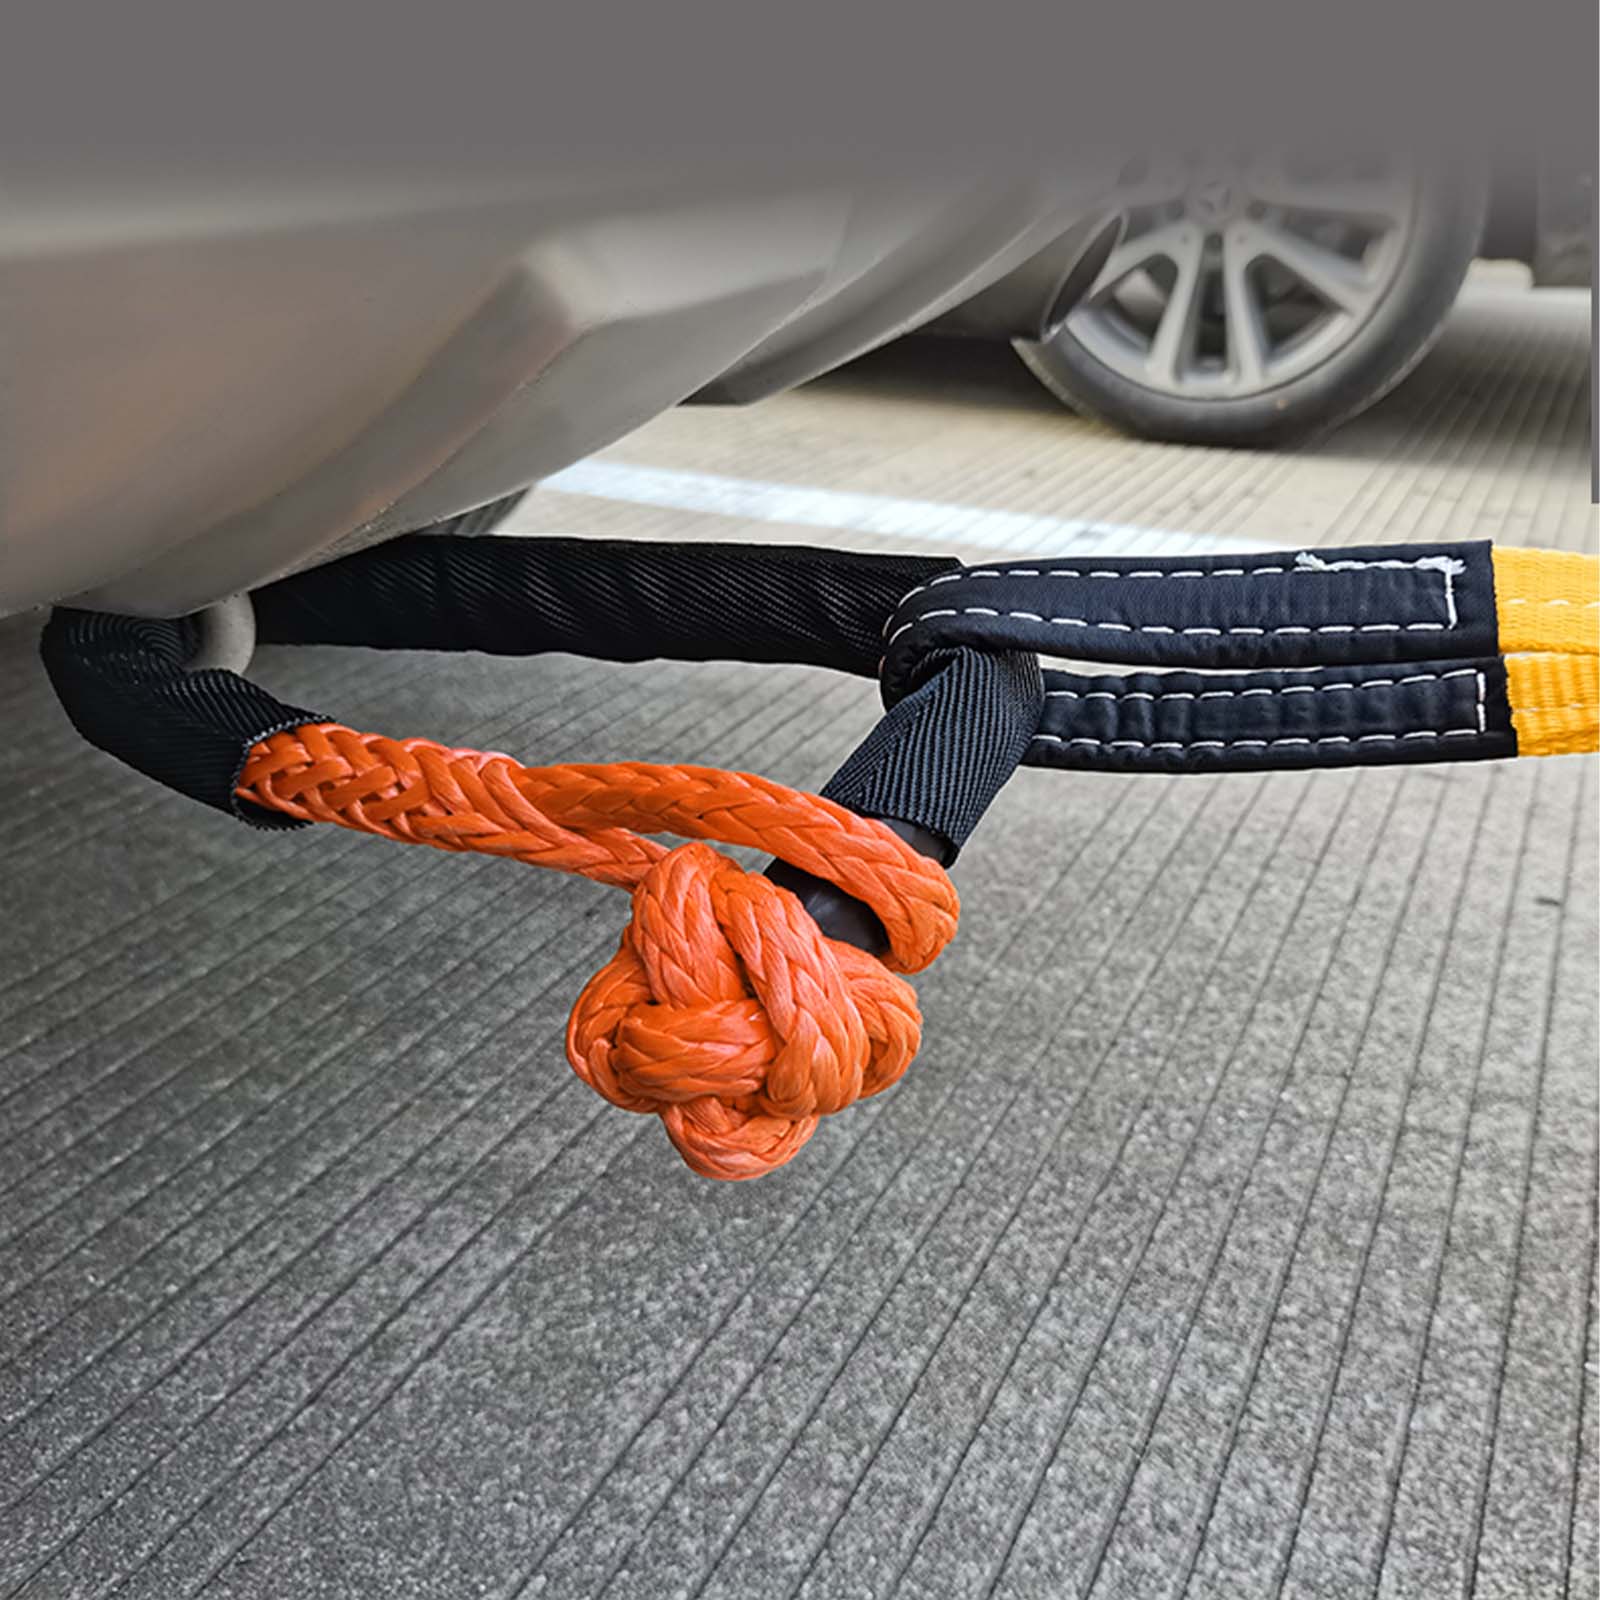 OPENROAD Synthetic Soft Shackle Rope, 2" X 23" (38,000lbs) with Extra Sleeves  openroad4wd.com   